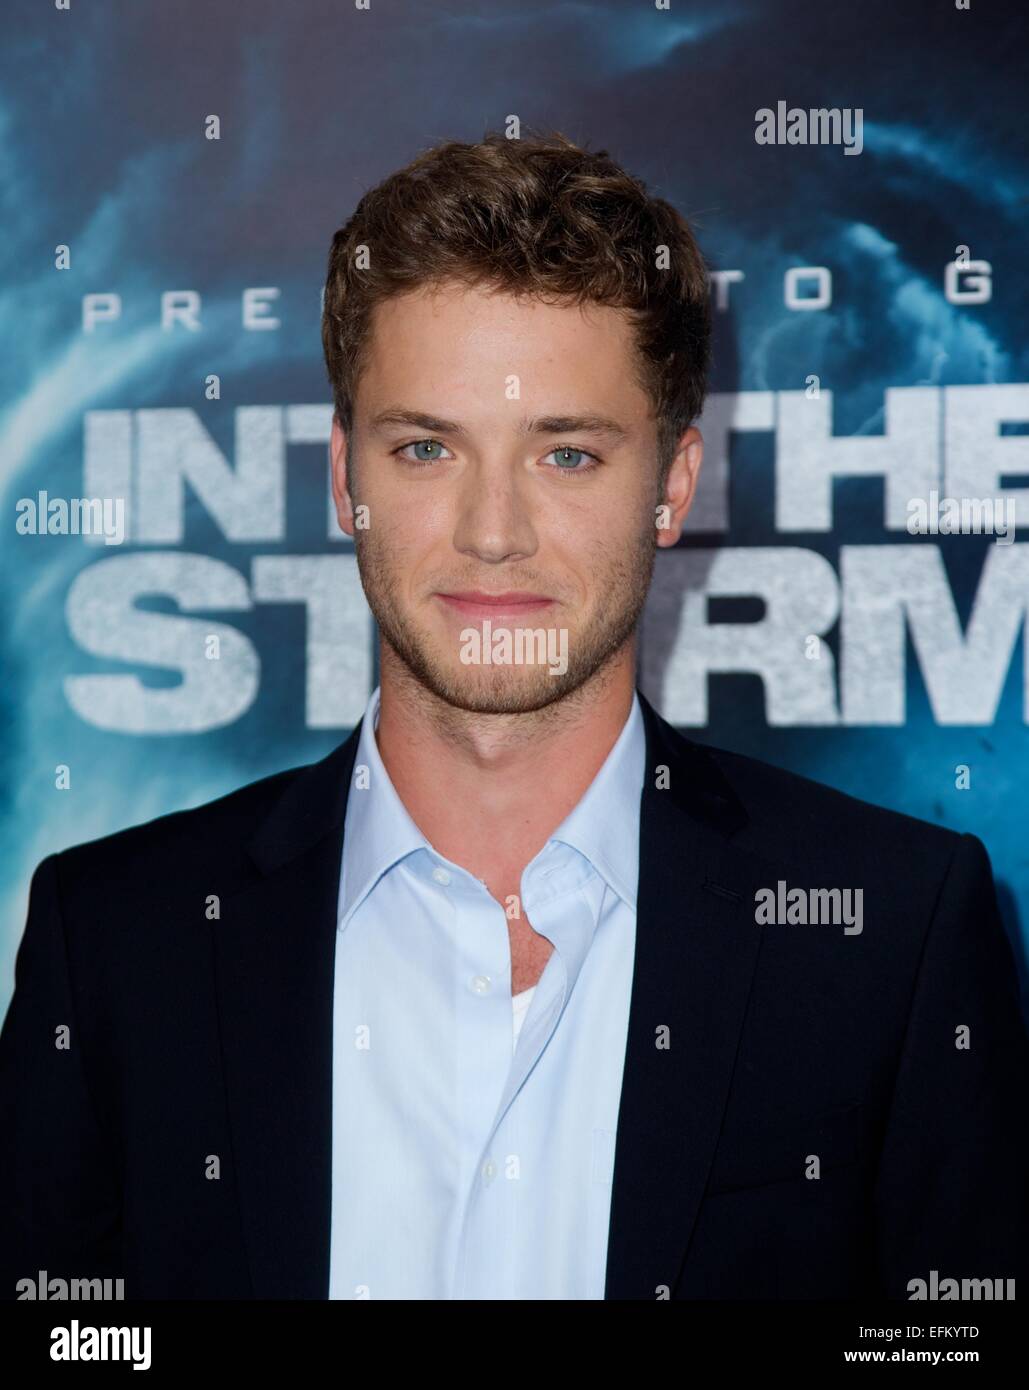 Weltpremiere von "In The Storm" auf AMC Lincoln Square Theater - Red Carpet Ankünfte mit: Jeremy Sumpter wo: New York City, New York, USA bei: 4. August 2014 Stockfoto